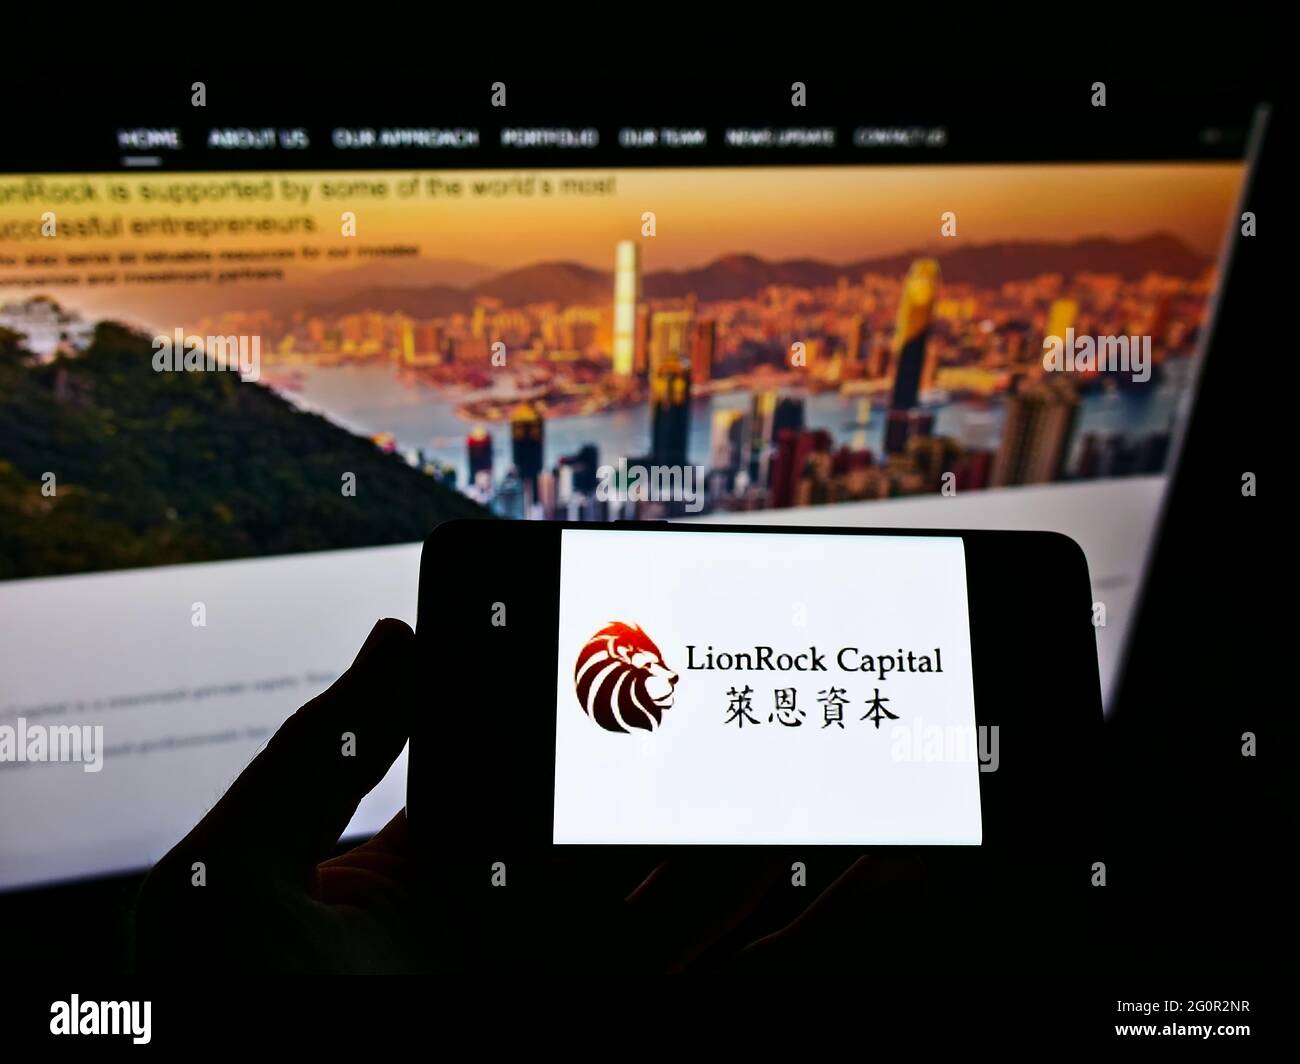 Person holding smartphone with logo of private equity firm LionRock Capital Limited on screen in front of website. Focus on phone display. Stock Photo